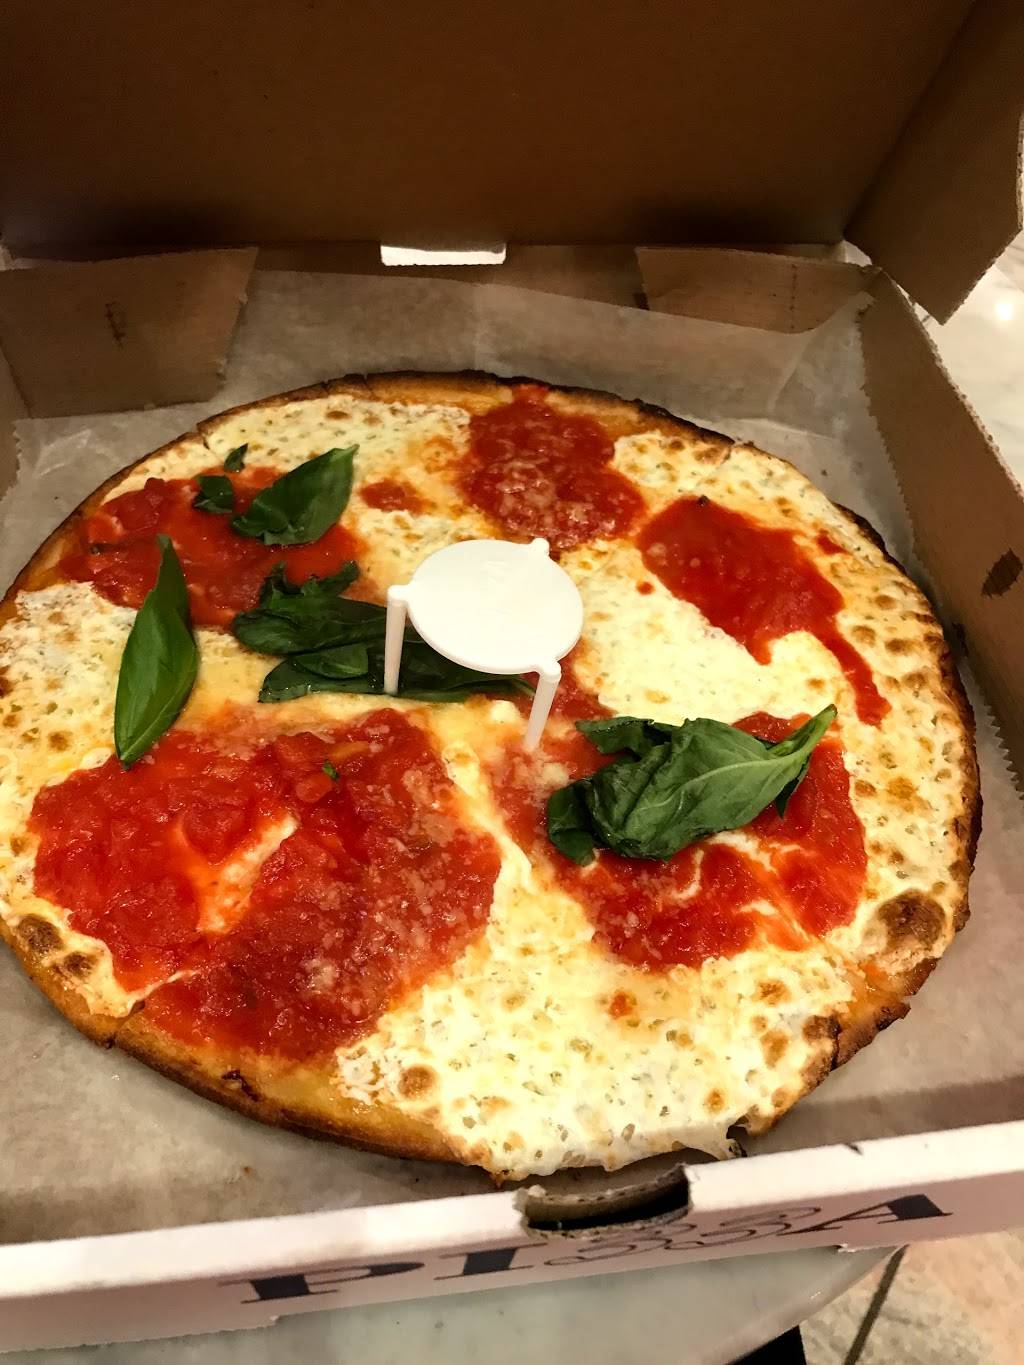 Brickoven Pizza 33 | meal delivery | 489 3rd Ave, New York, NY 10016, USA | 2125459191 OR +1 212-545-9191